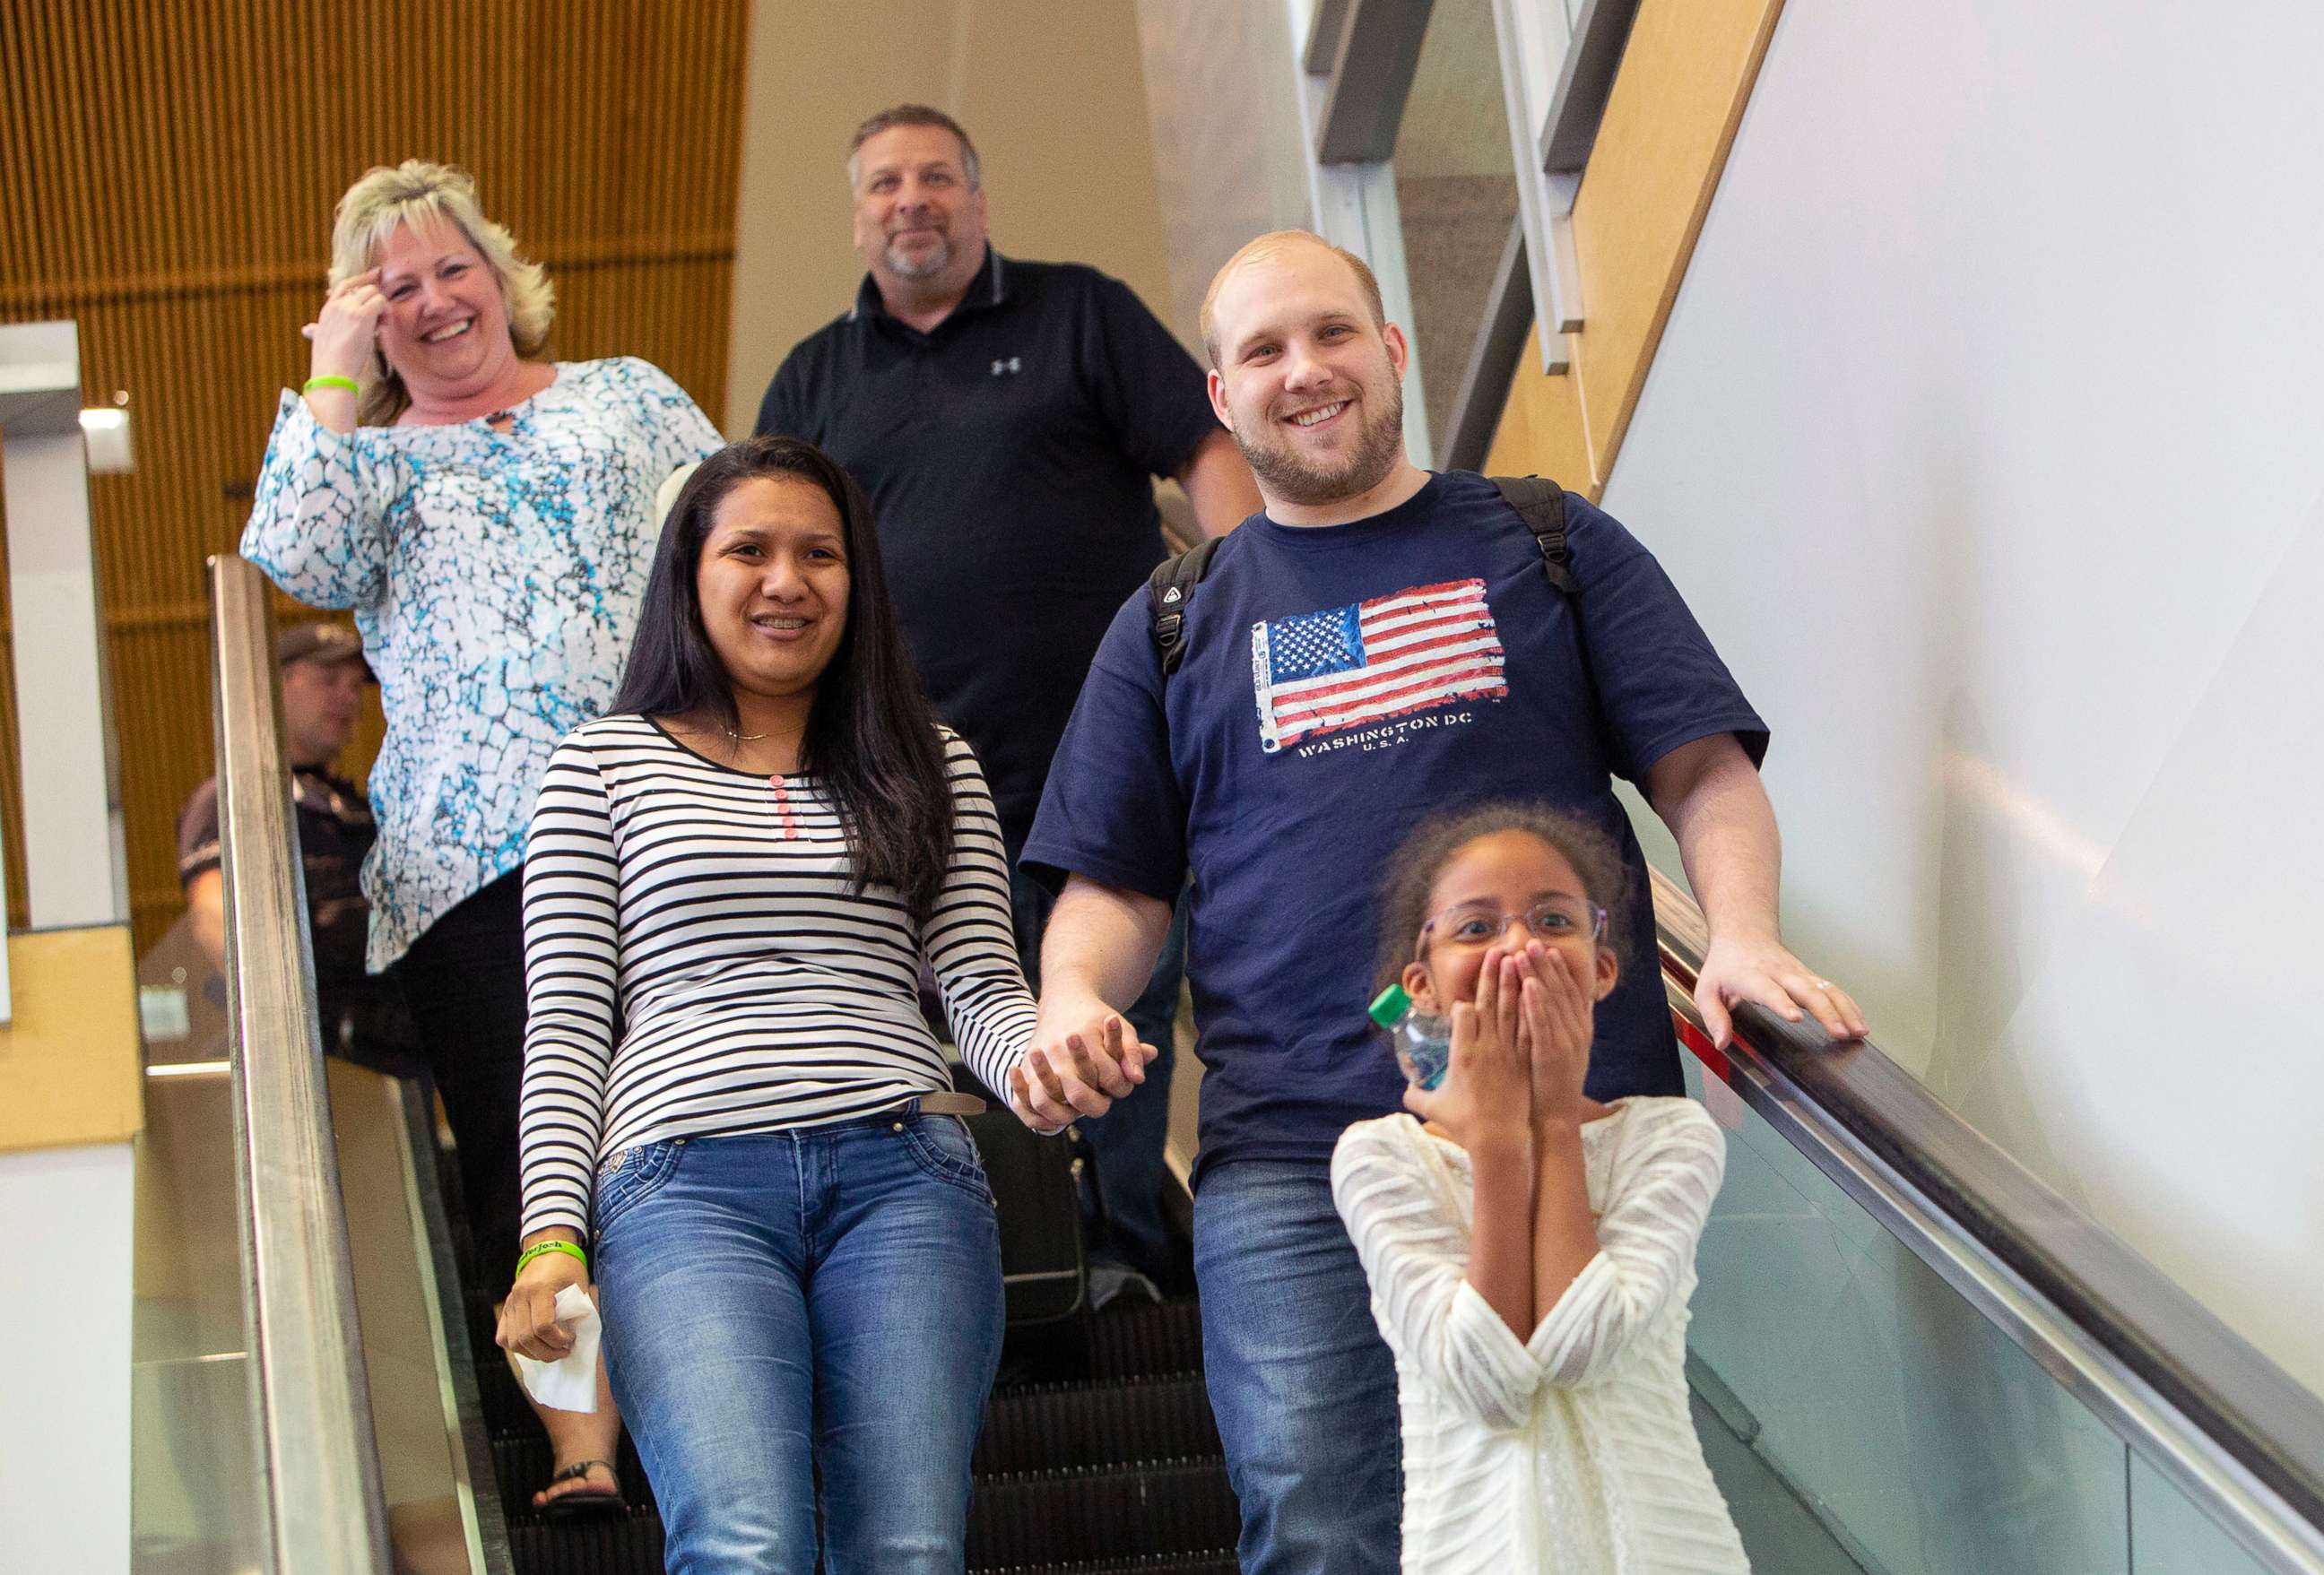 PHOTO: Josh Holt, right, returns with wife, Thamara Caleno, left, and daughter, Marian, bottom, to a crowd of friends and family in Salt Lake City after receiving medical care and visiting President Donald Trump in Washington, May 28, 2018.